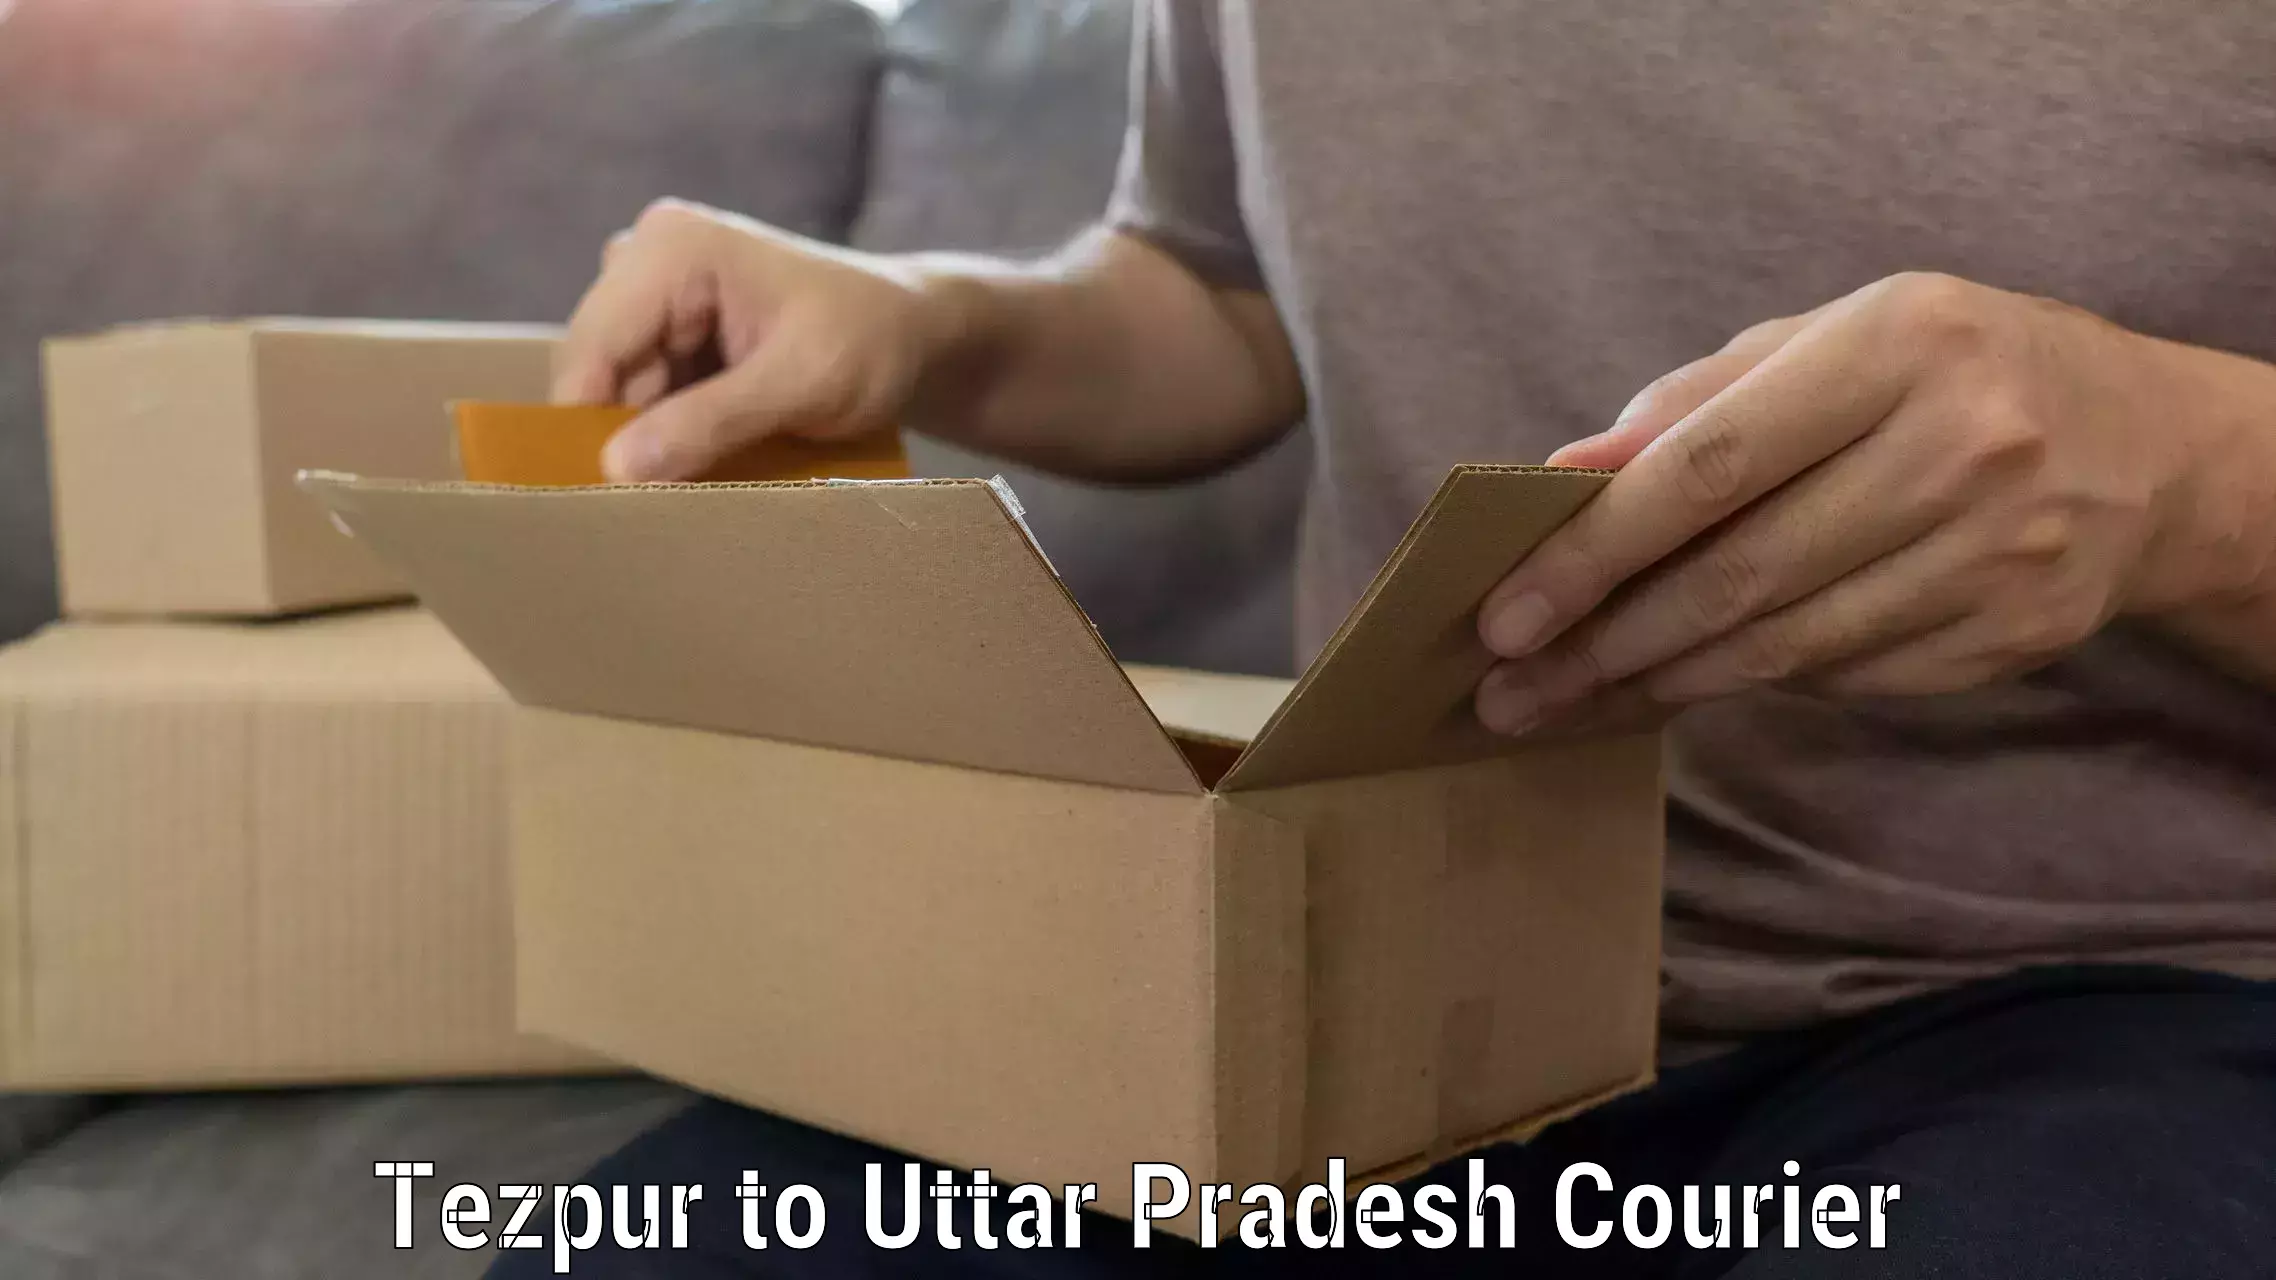 Efficient furniture movers Tezpur to Lucknow